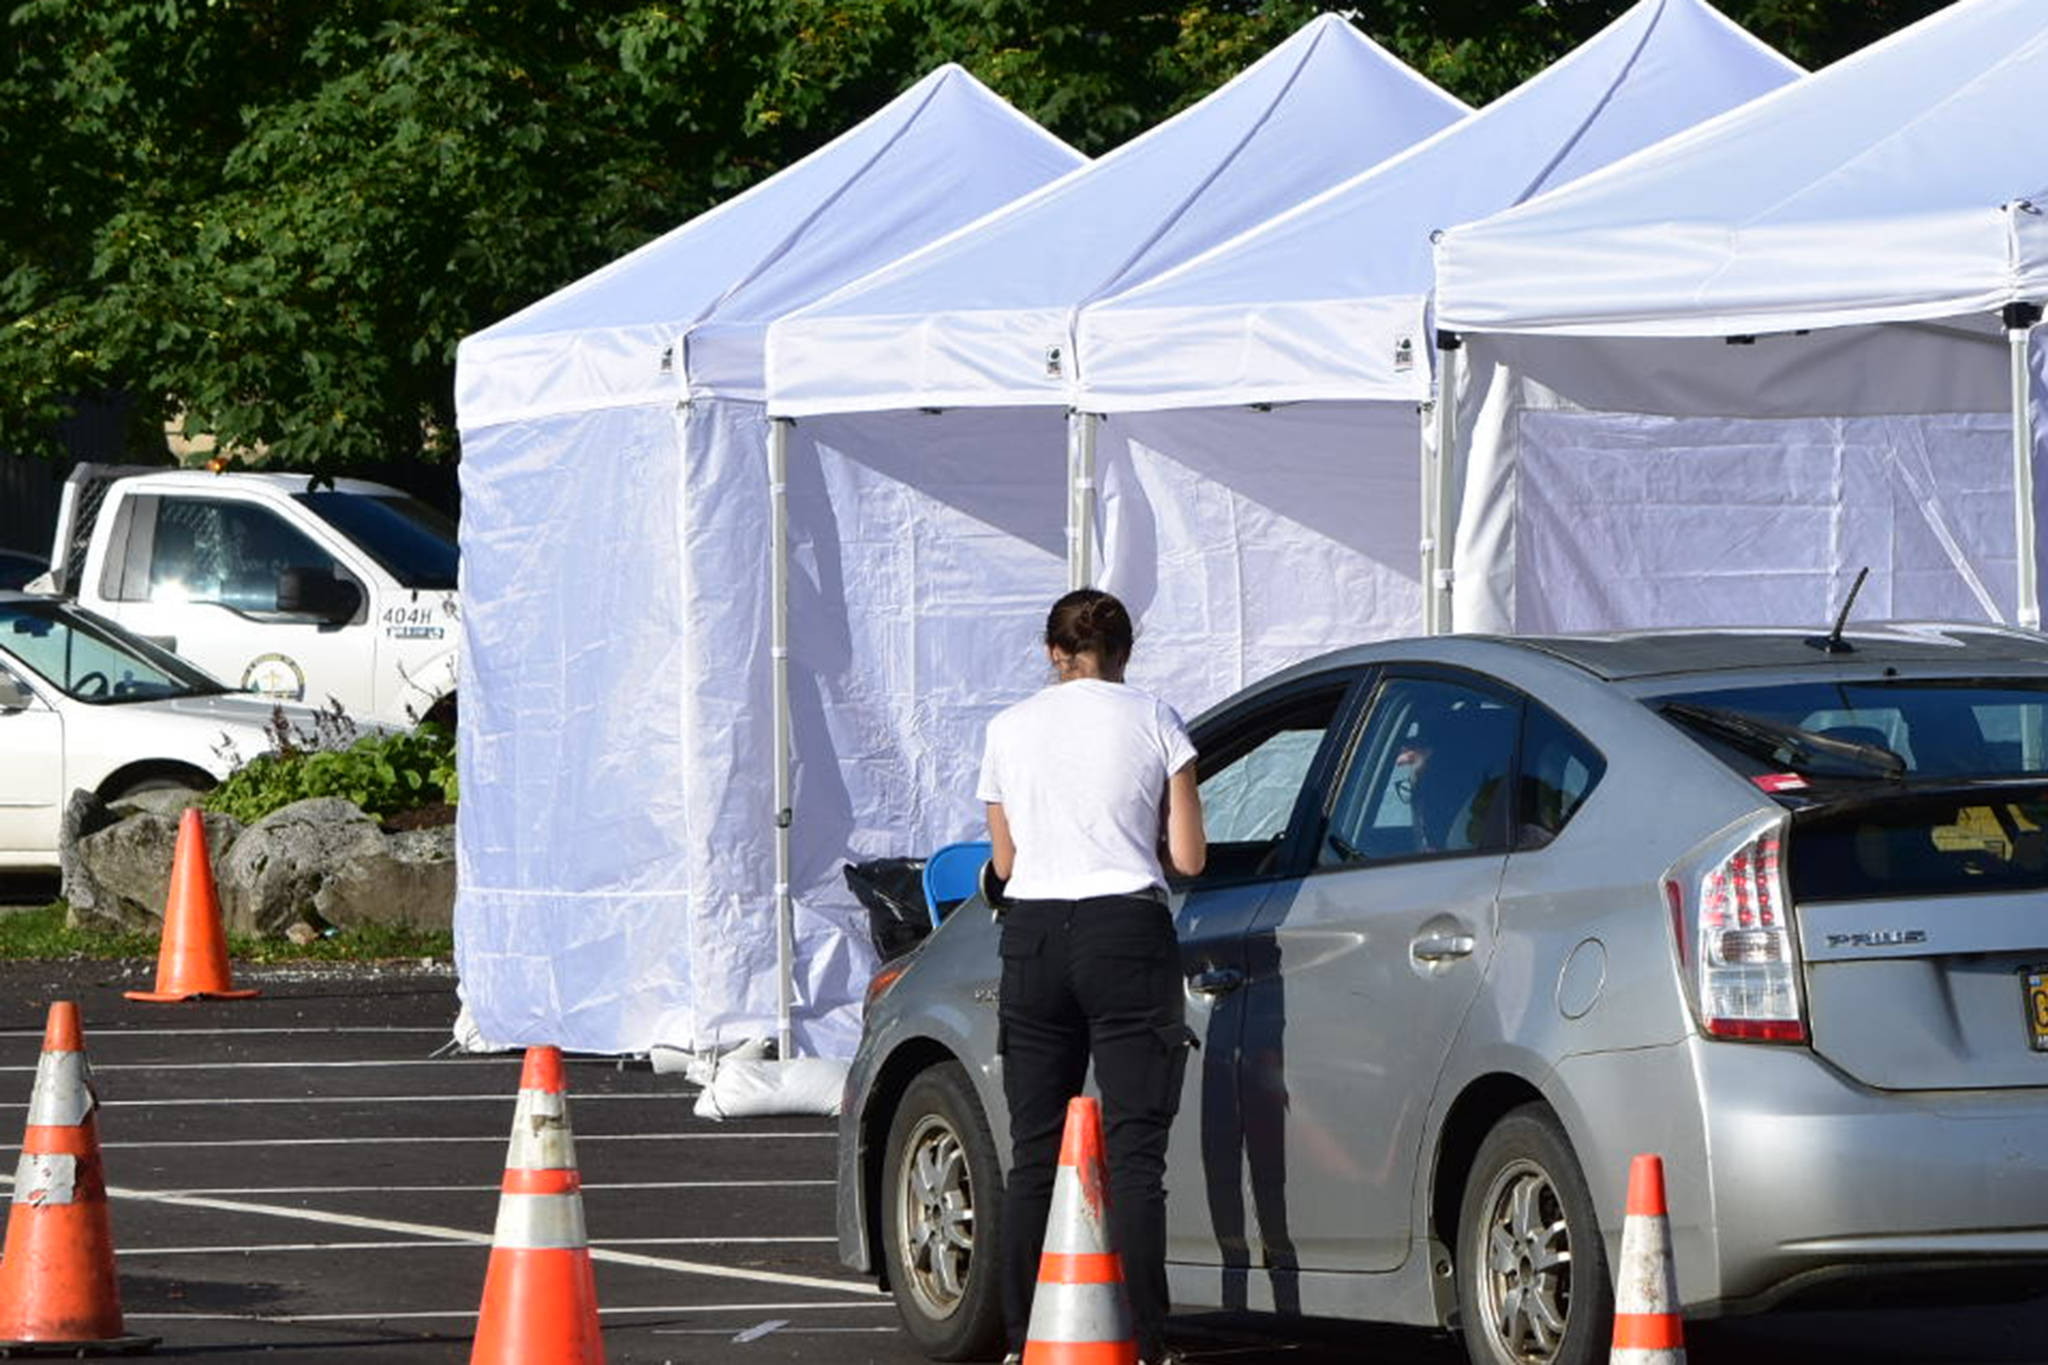 A screener talks to a driver at a temporary testing site outside Centennial Hall. The City and Borough of Juneau set up additional testing centers in the parking lot of Centennial Hall in downtown Juneau on Thursday, Sept. 10, 2020. Additional sites were needed to meet high demand for testing following a advisory earlier in the week. (Peter Segall / Juneau Empire)